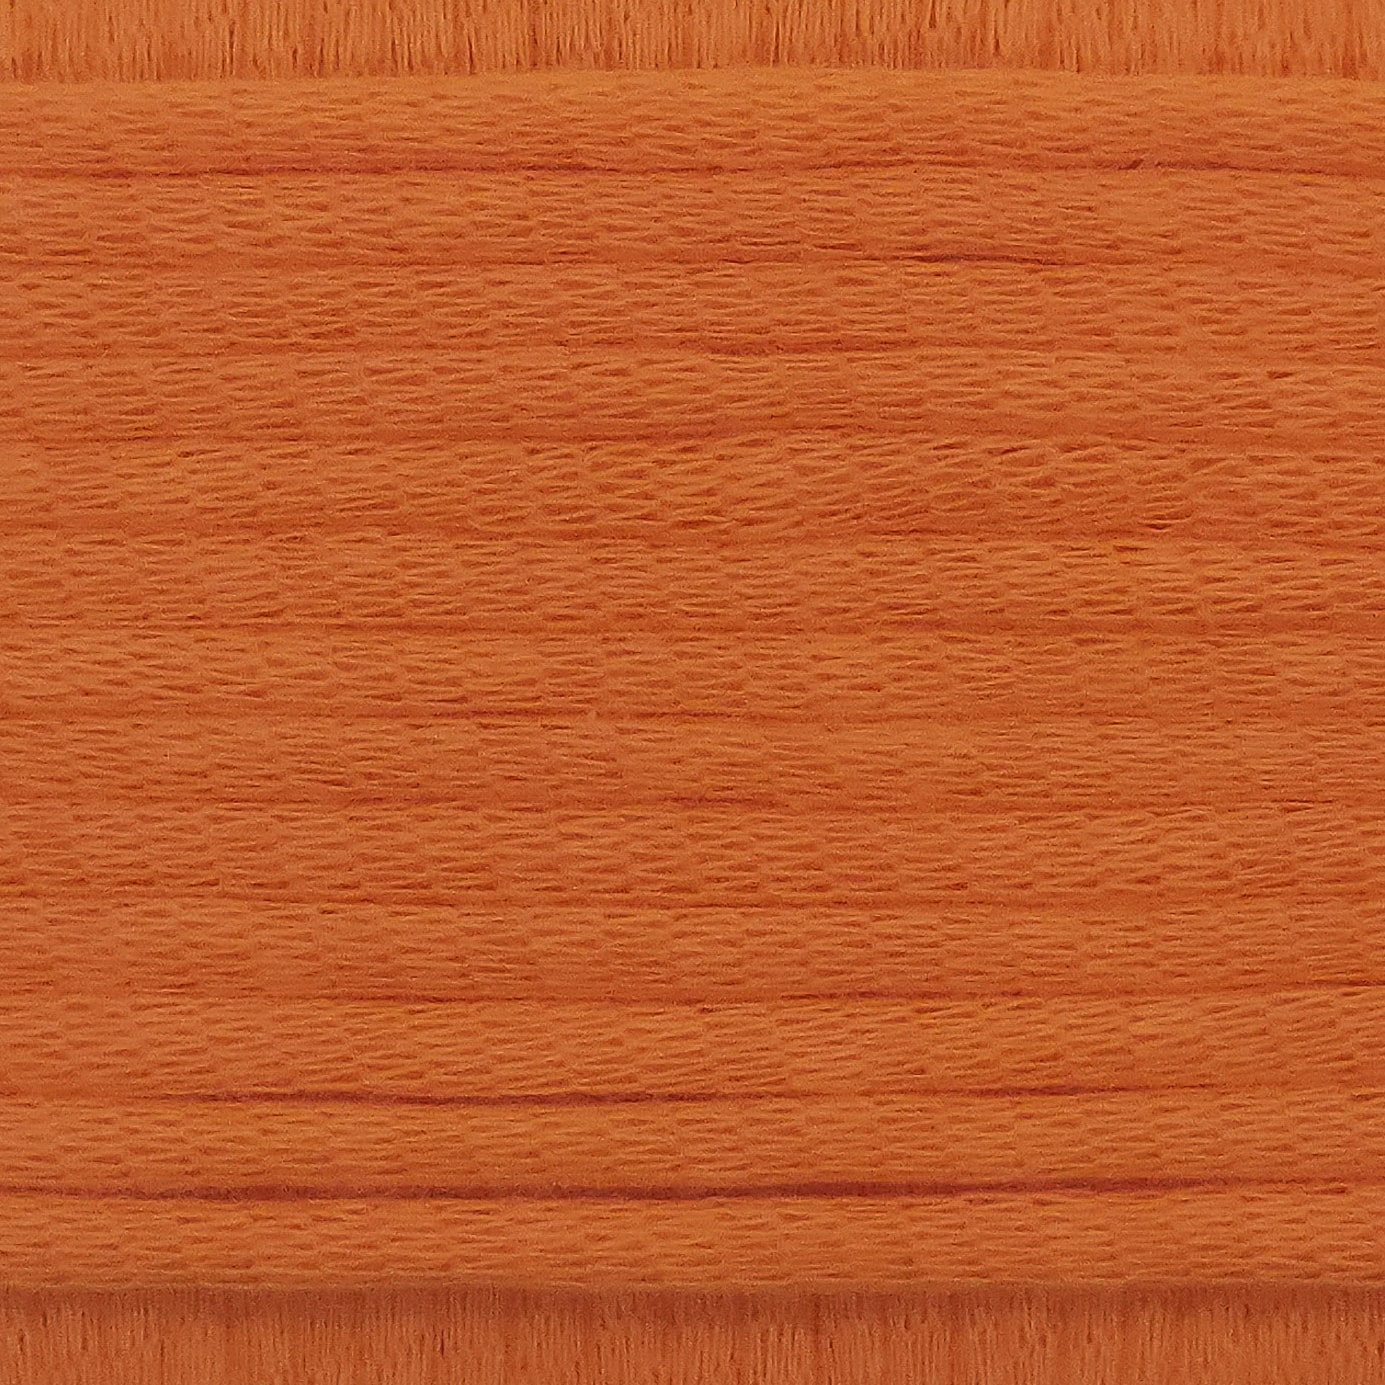 A close-up image showing the texture of a fire orange coloured yarn that is friendly for crochet beginners.